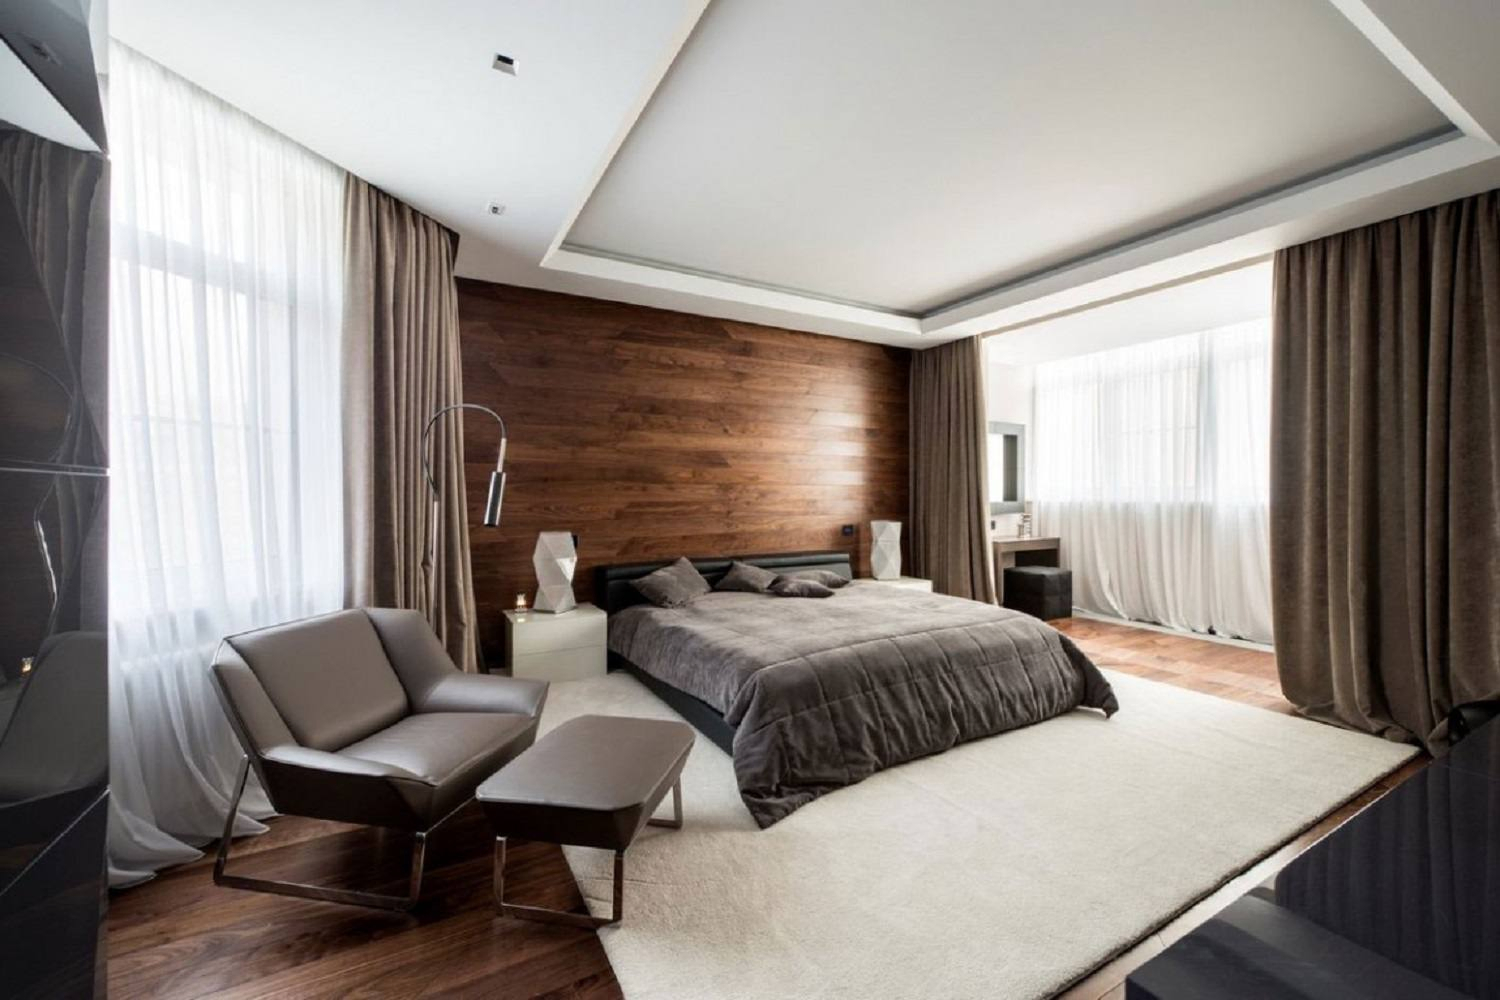 21.SIMPHOME.COM tips and photos for decorating a modern master bedroom